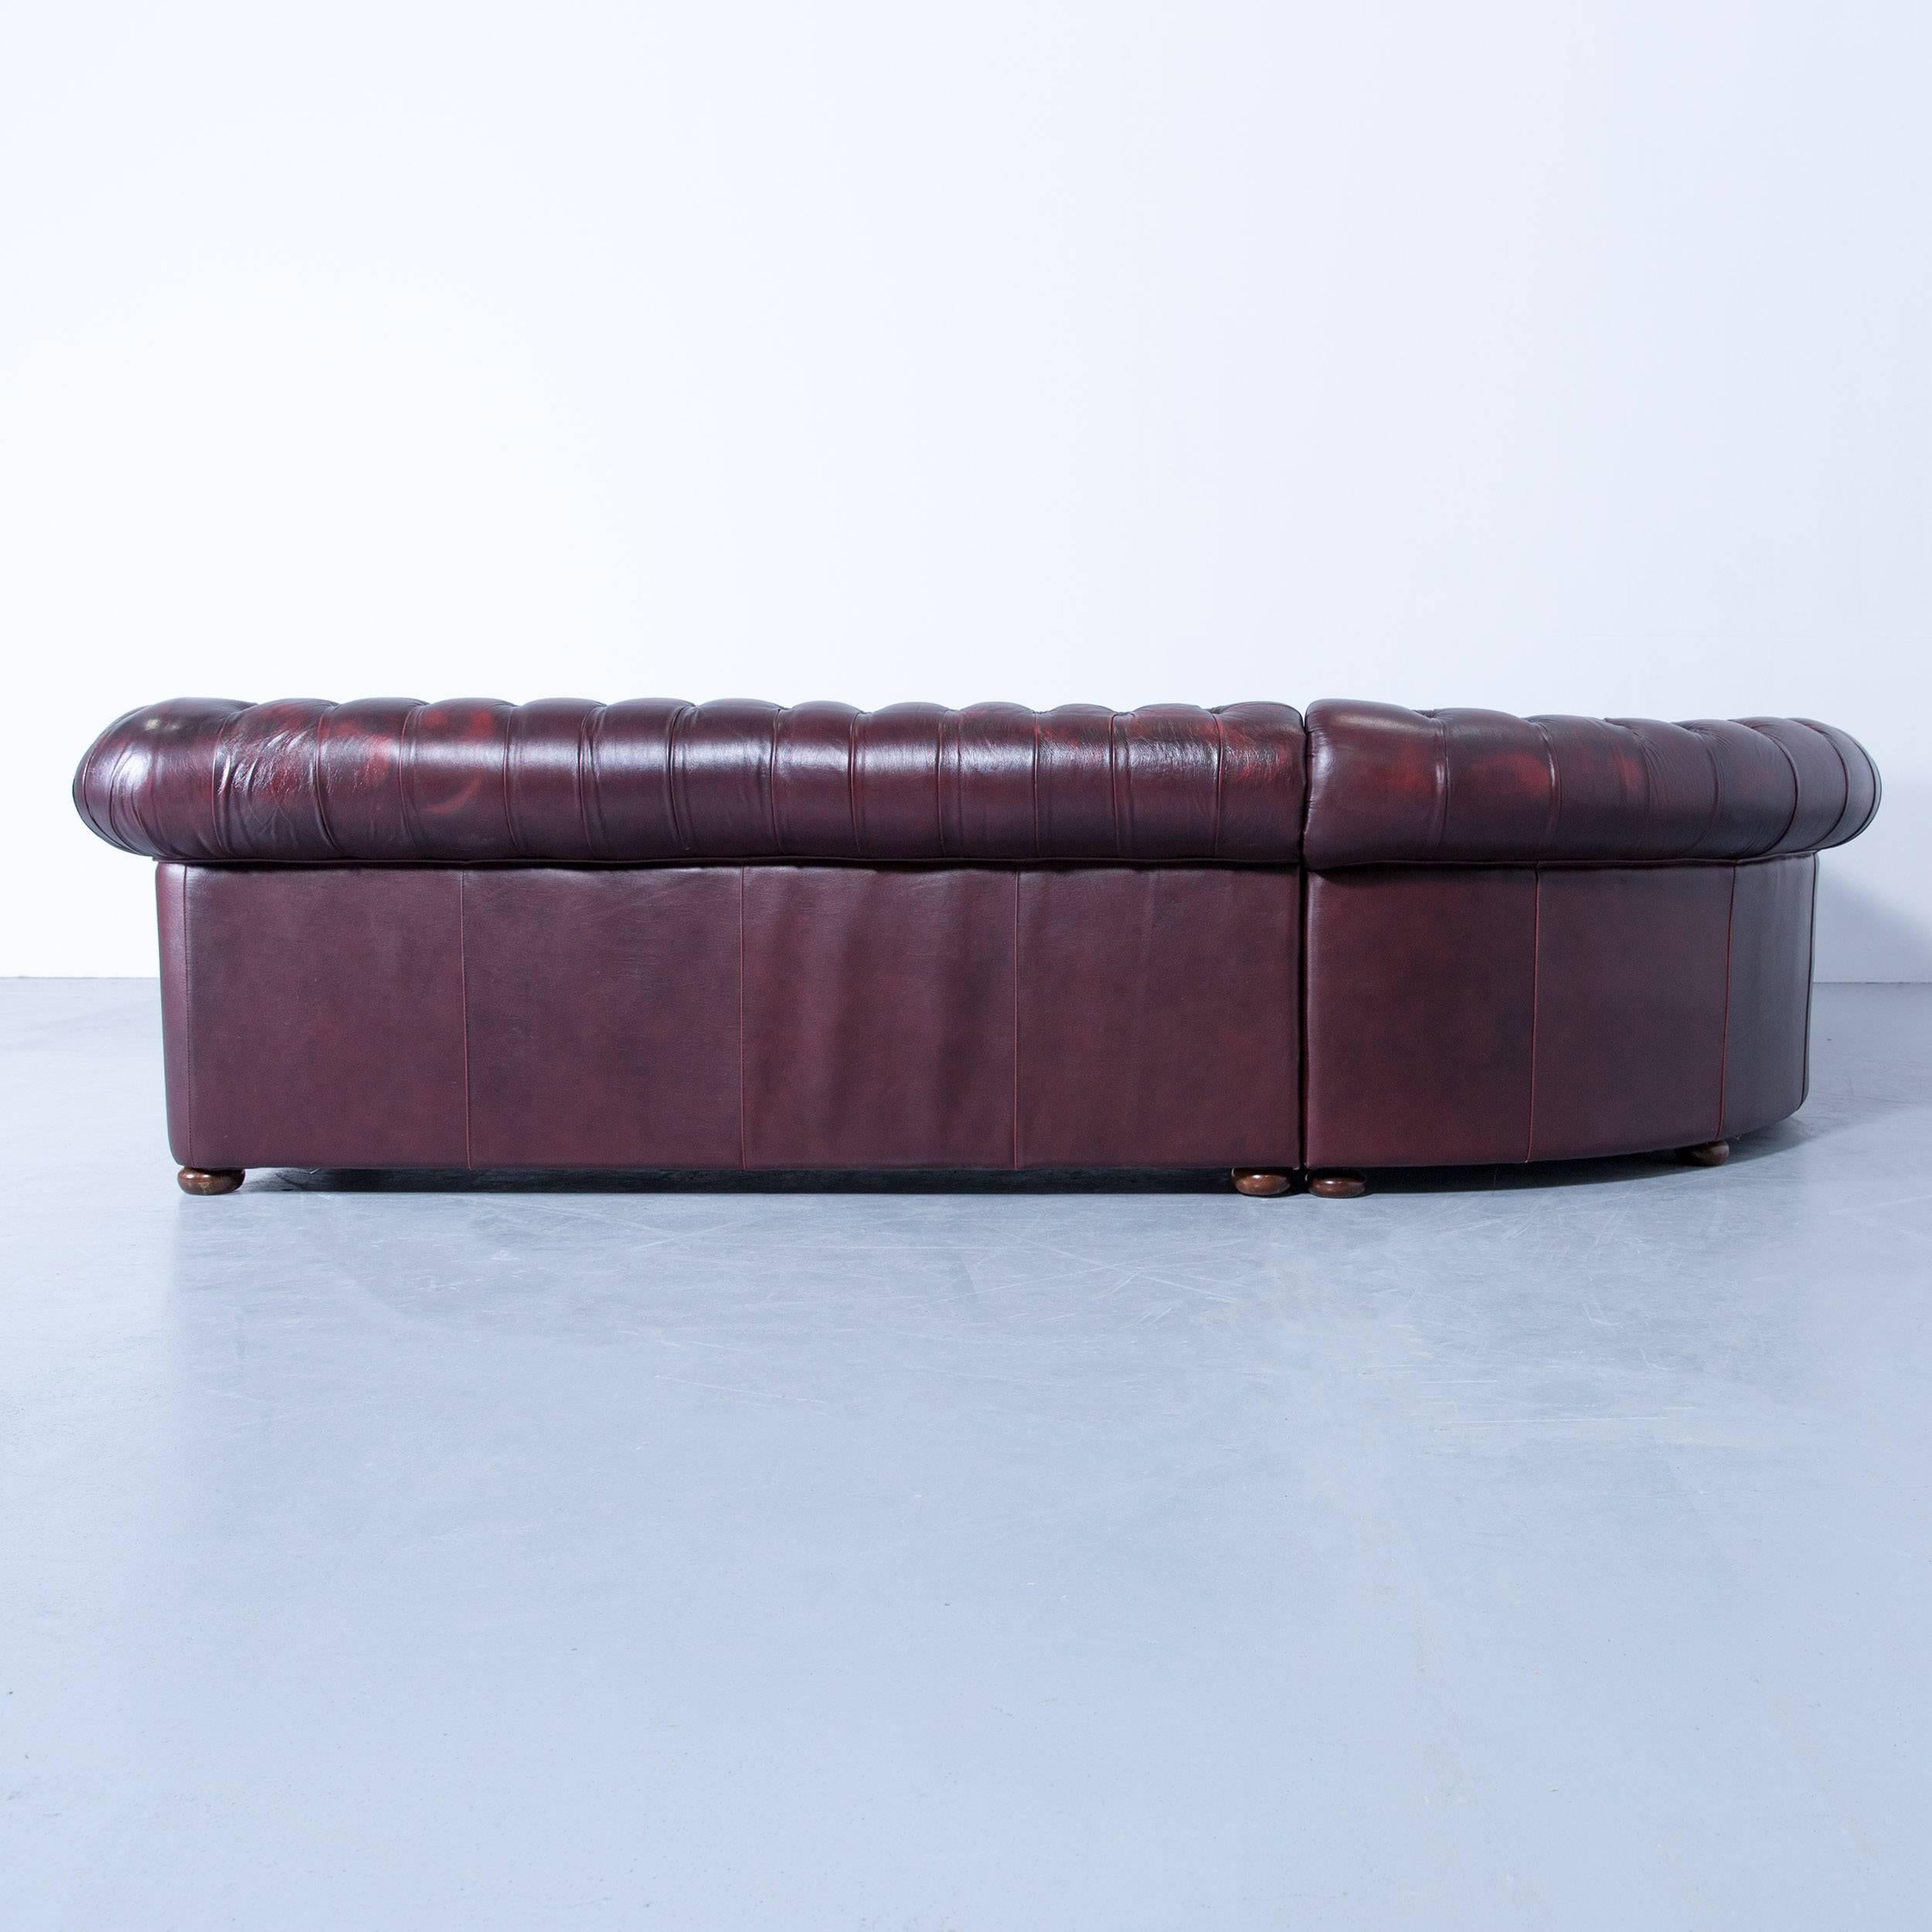 British Rochester Chesterfield Corner Sofa and Footstool Oxblood Red Leather Couch Set